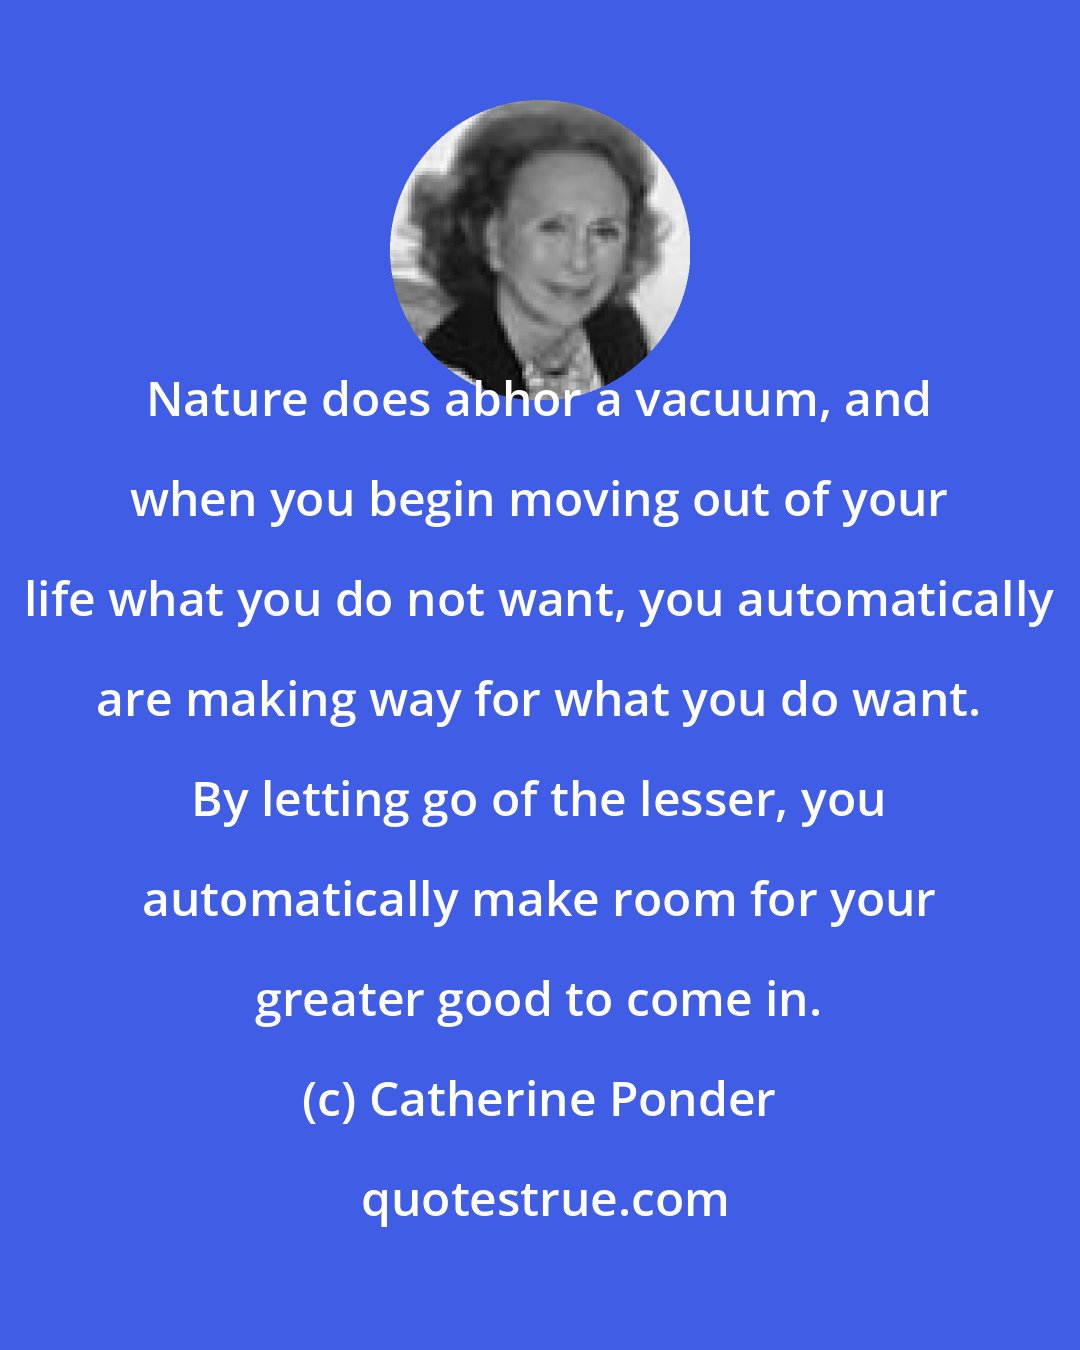 Catherine Ponder: Nature does abhor a vacuum, and when you begin moving out of your life what you do not want, you automatically are making way for what you do want. By letting go of the lesser, you automatically make room for your greater good to come in.